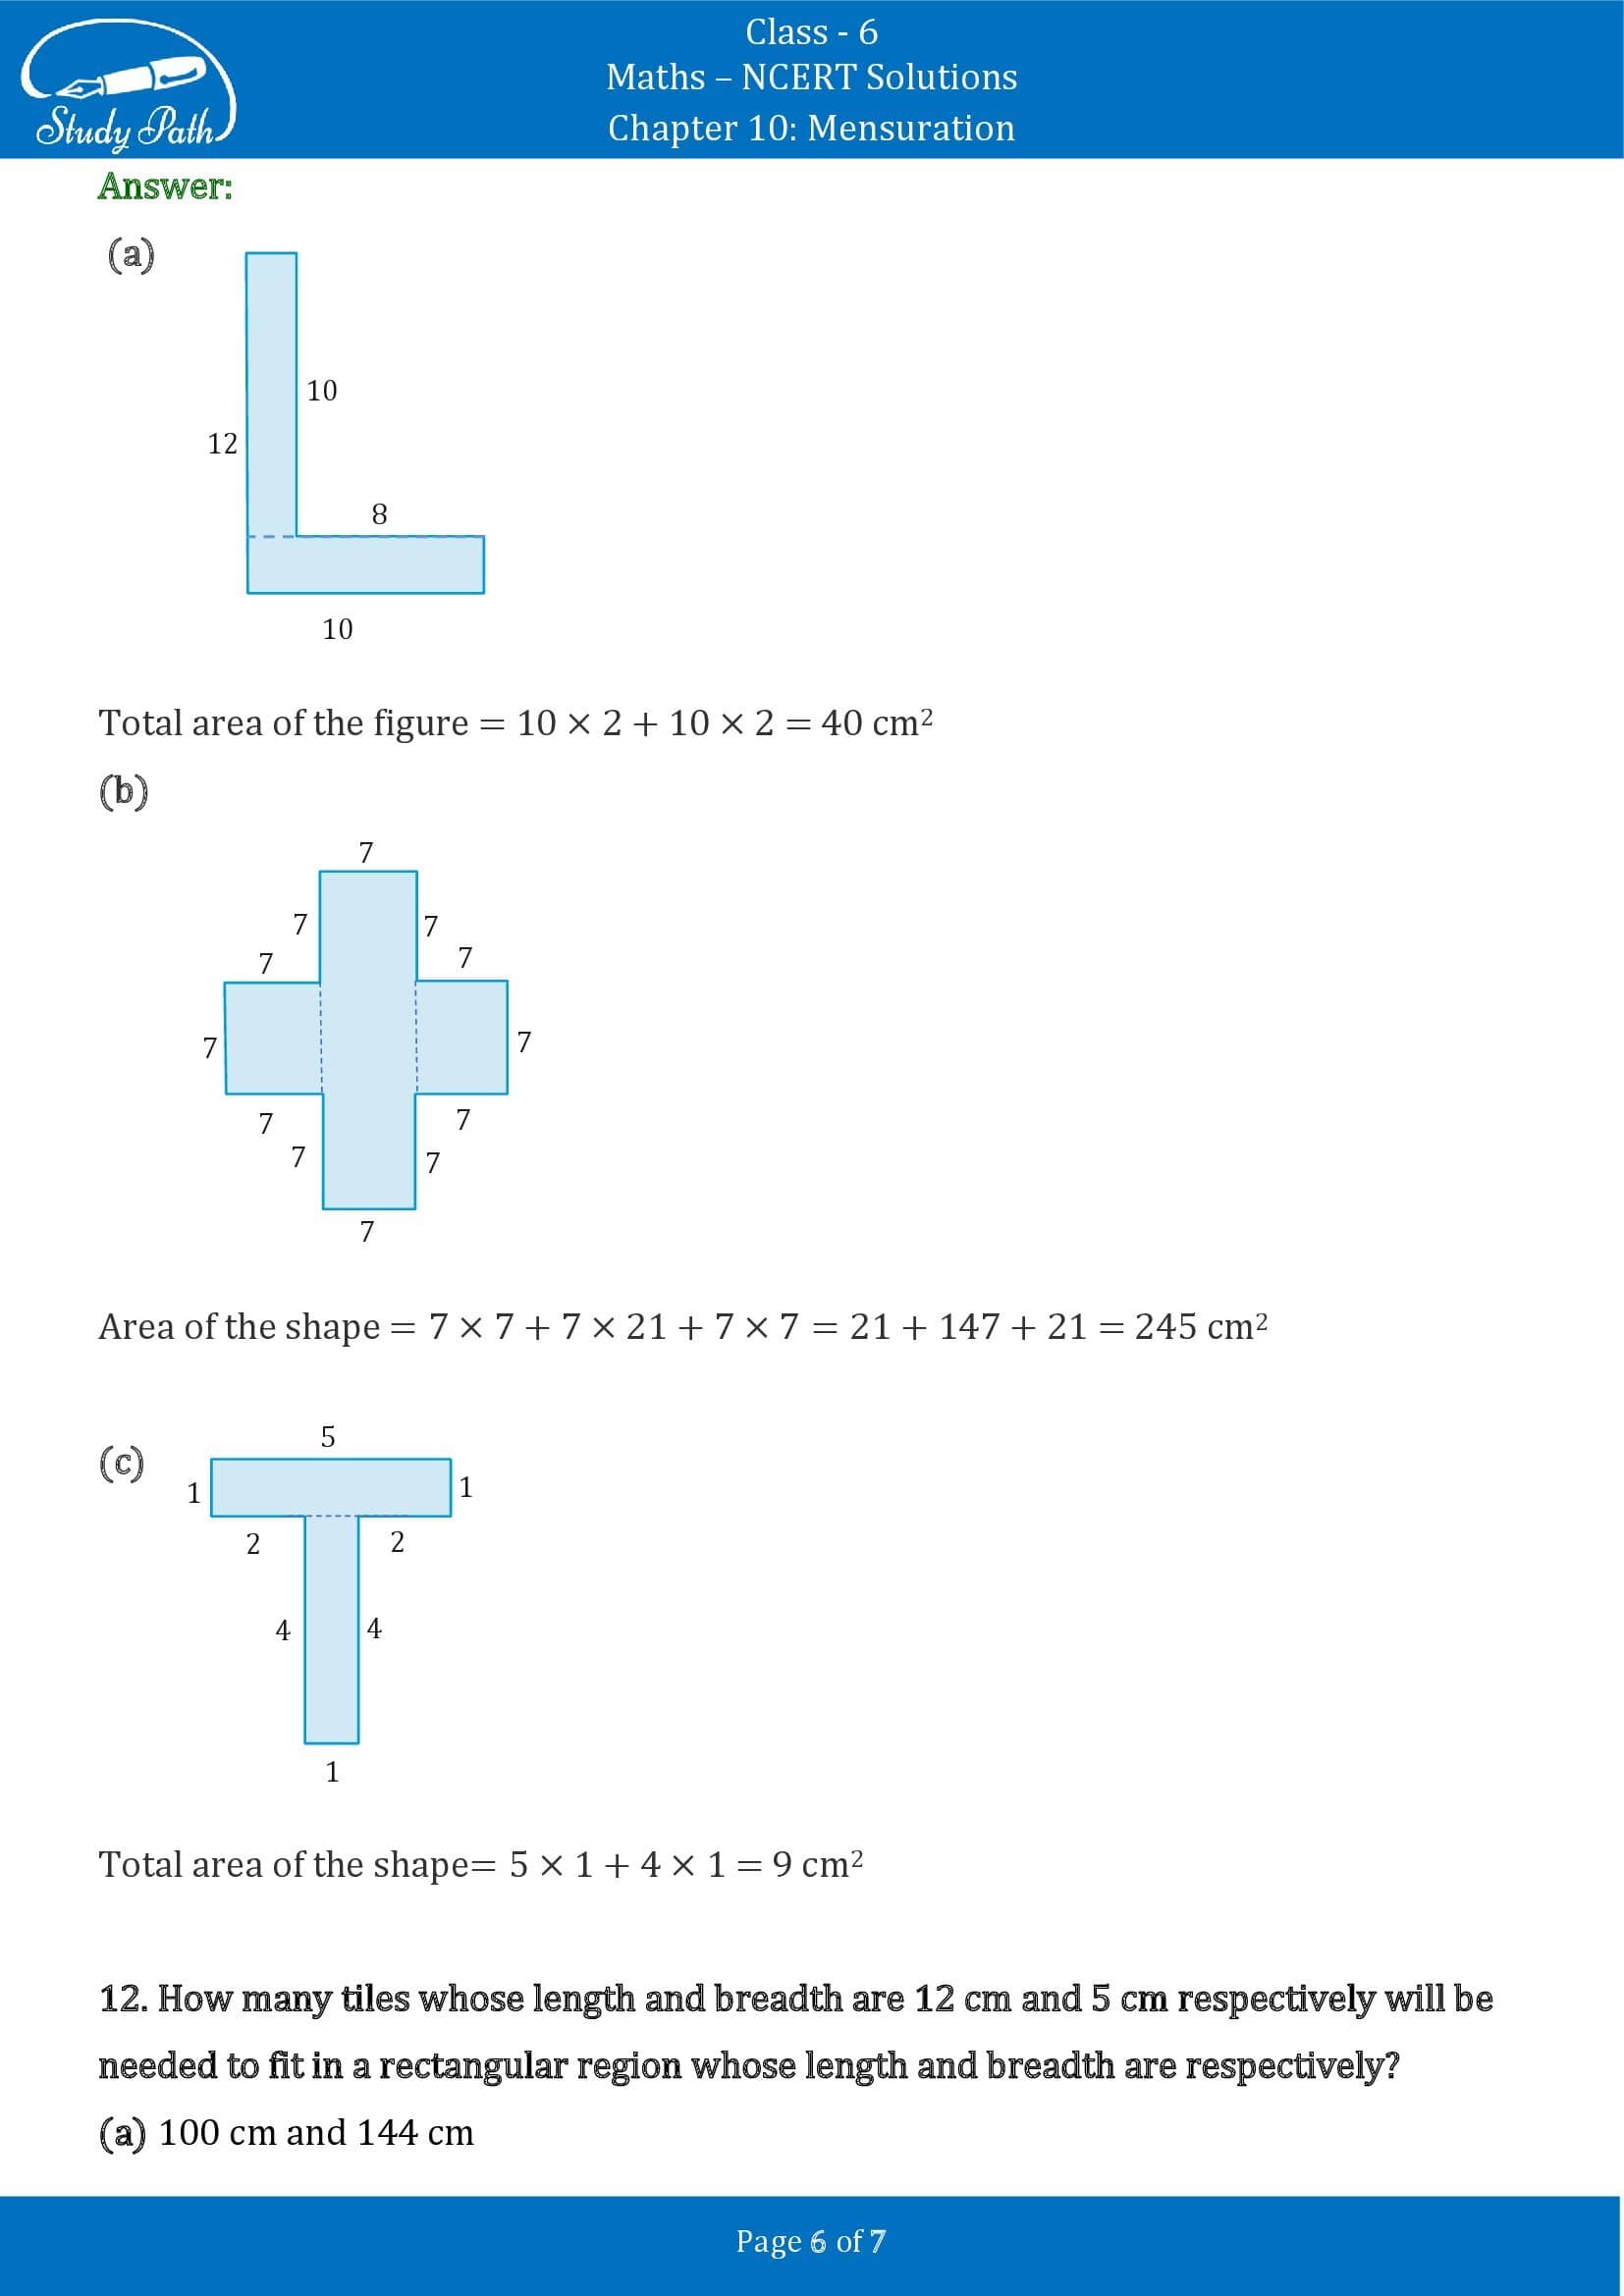 NCERT Solutions for Class 6 Maths Chapter 10 Mensuration Exercise 10.3 00006